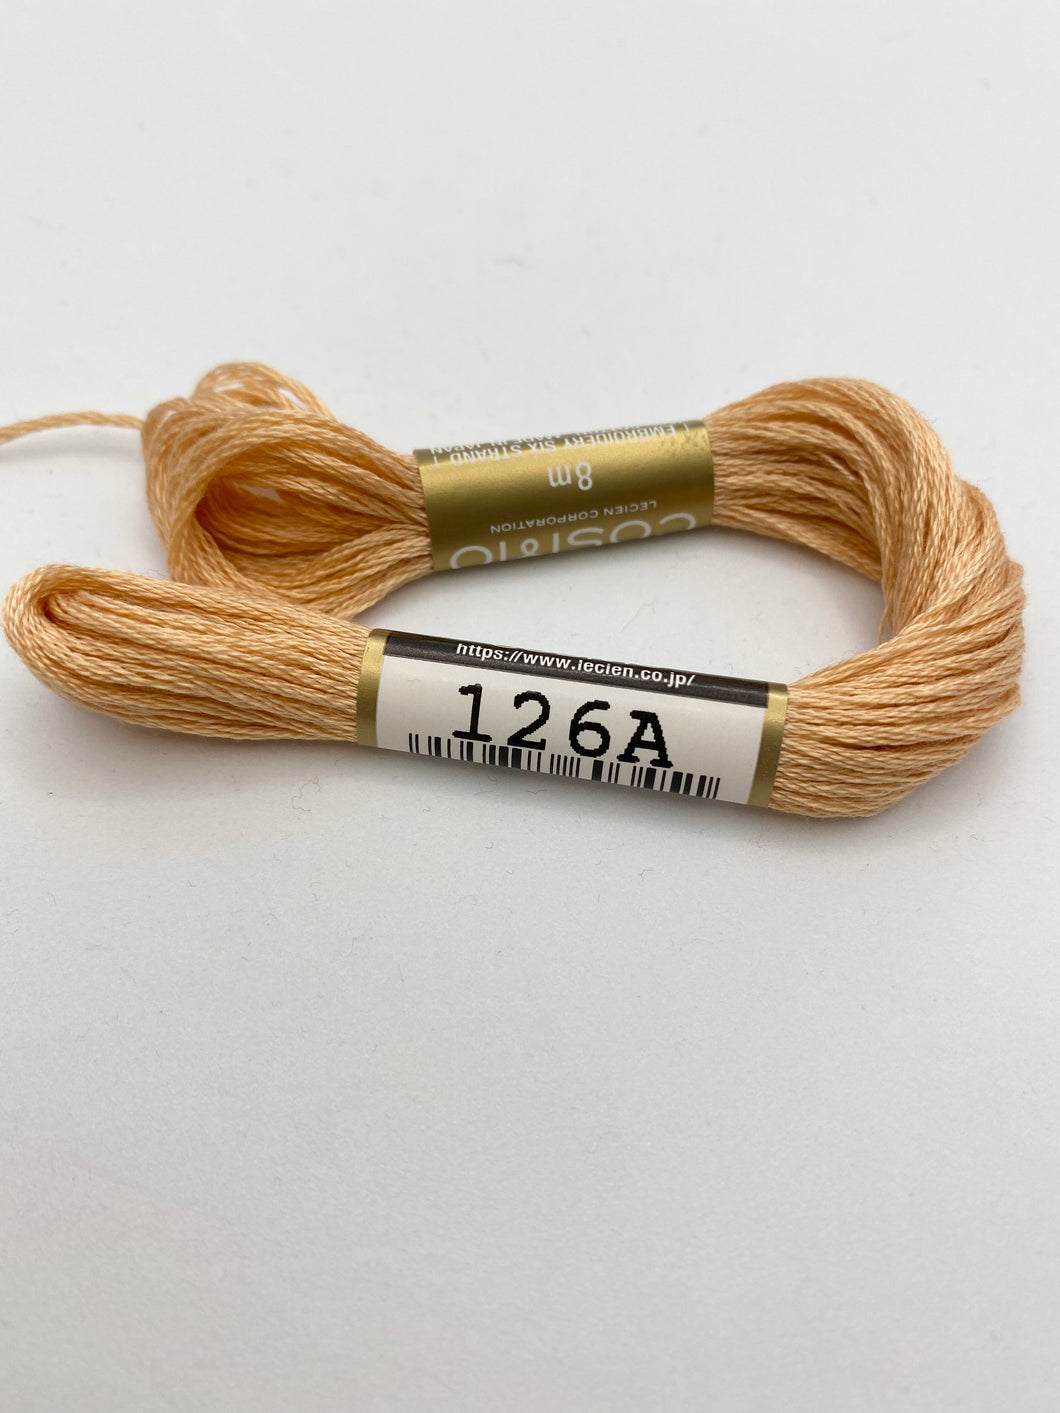 Cosmo Embroidery Floss, Browns, Siennas, and Beiges